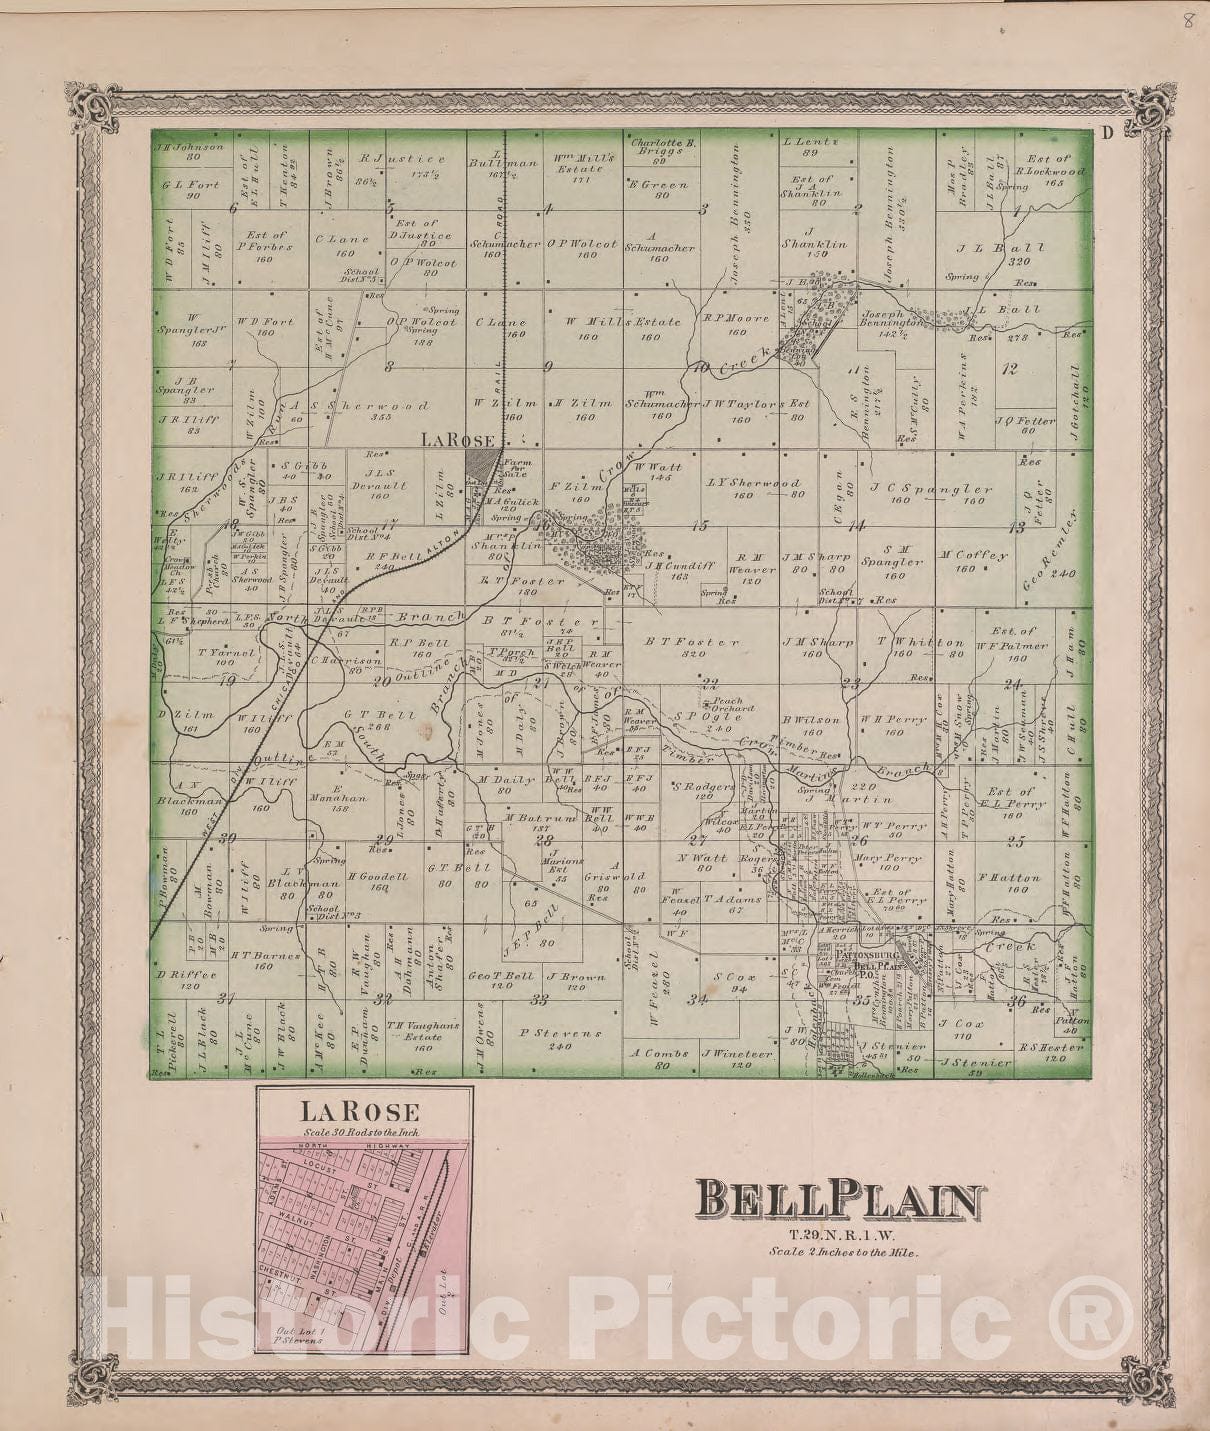 Historic 1870 Map - Atlas of Marshall Co. and The State of Illinois - BellPlain - Atlas of Marshall County and The State of Illinois